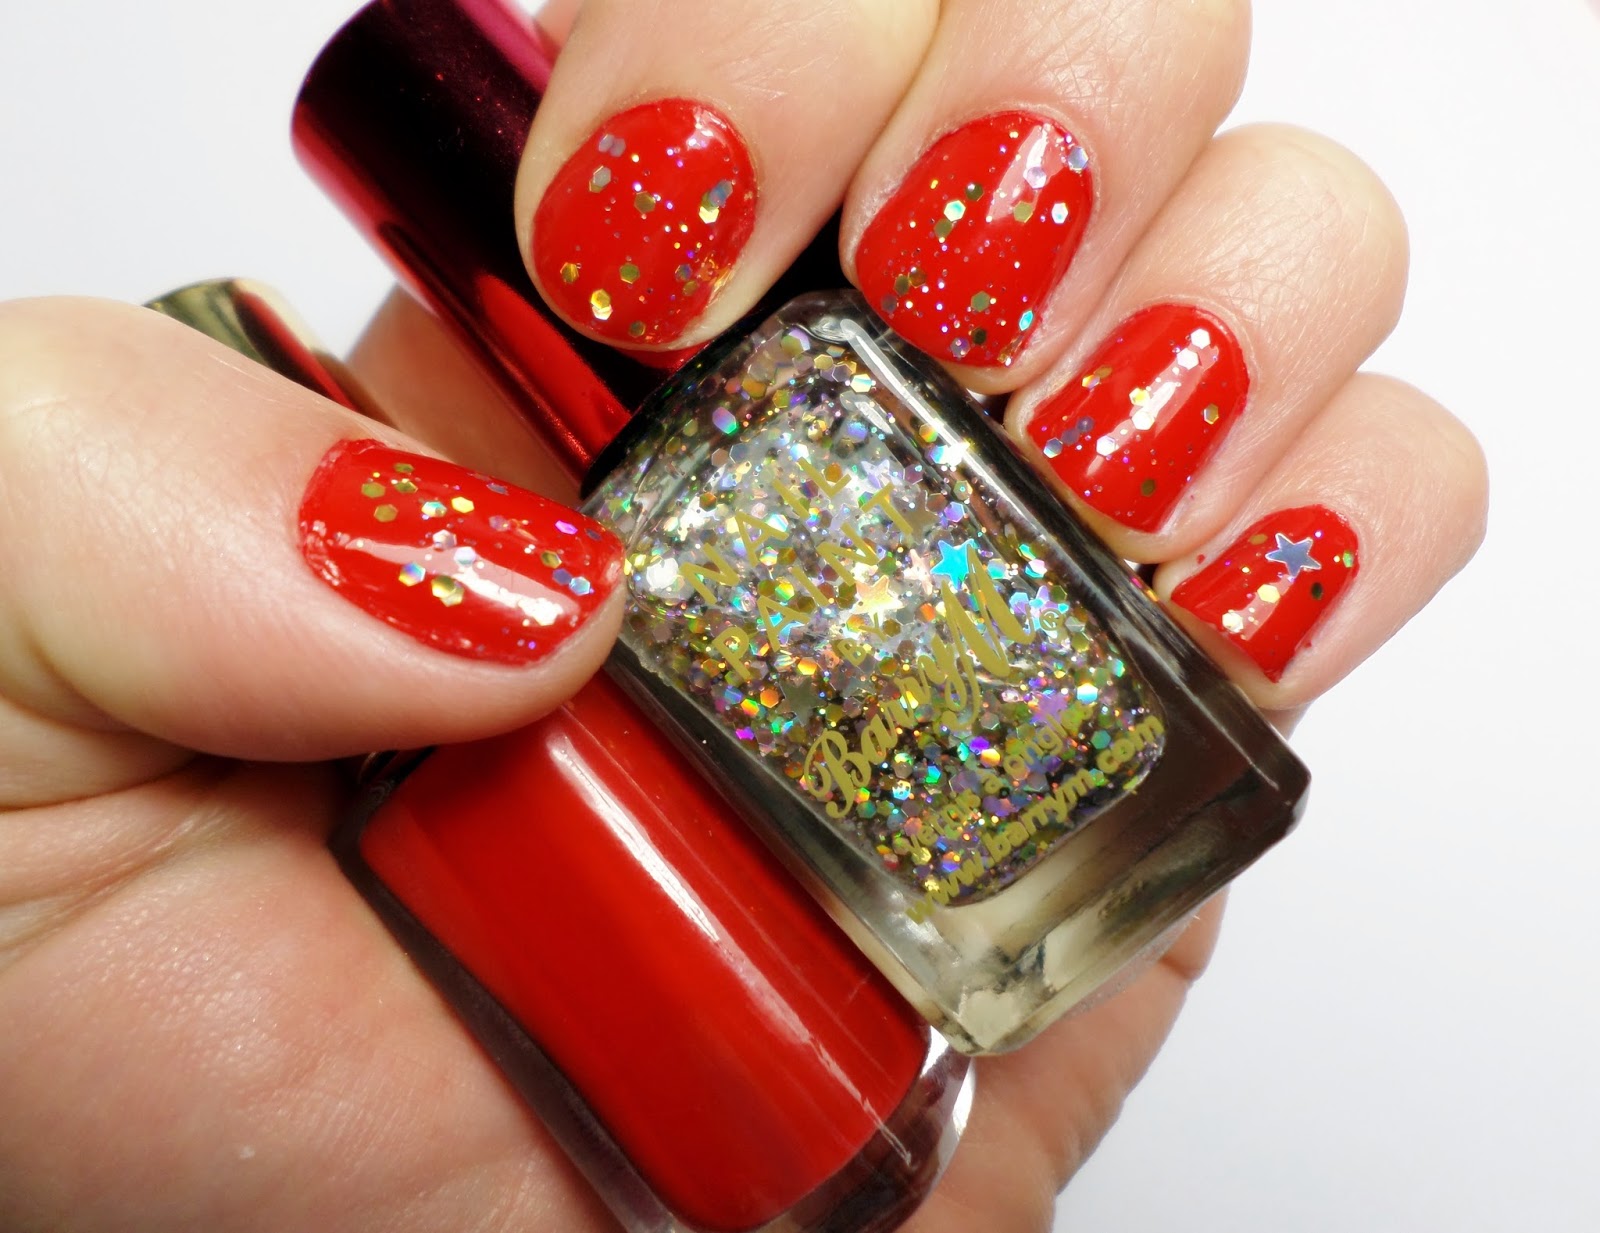 L'Oreal Color Riche 408 Exquisite Scarlet, Barry M Nail Paint in Starlight & Seche Vite Top Coat